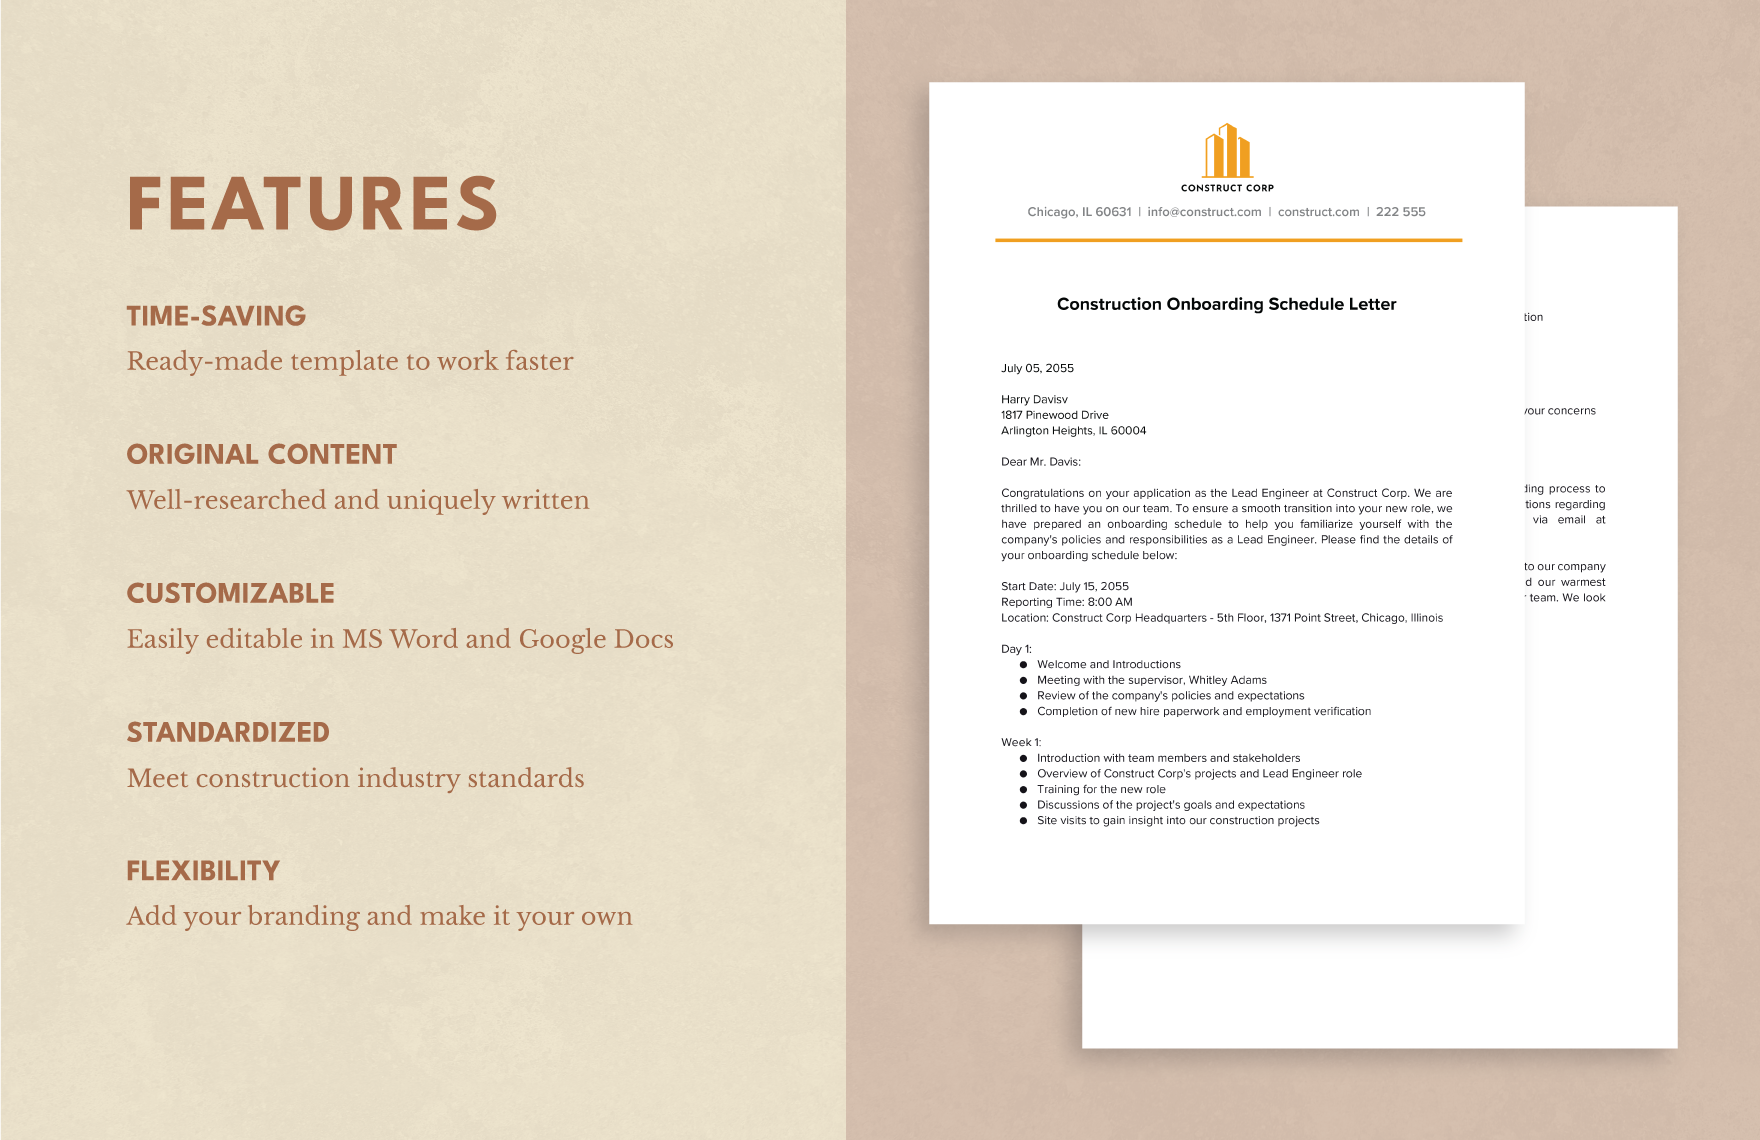 Construction Onboarding Schedule Letter Template